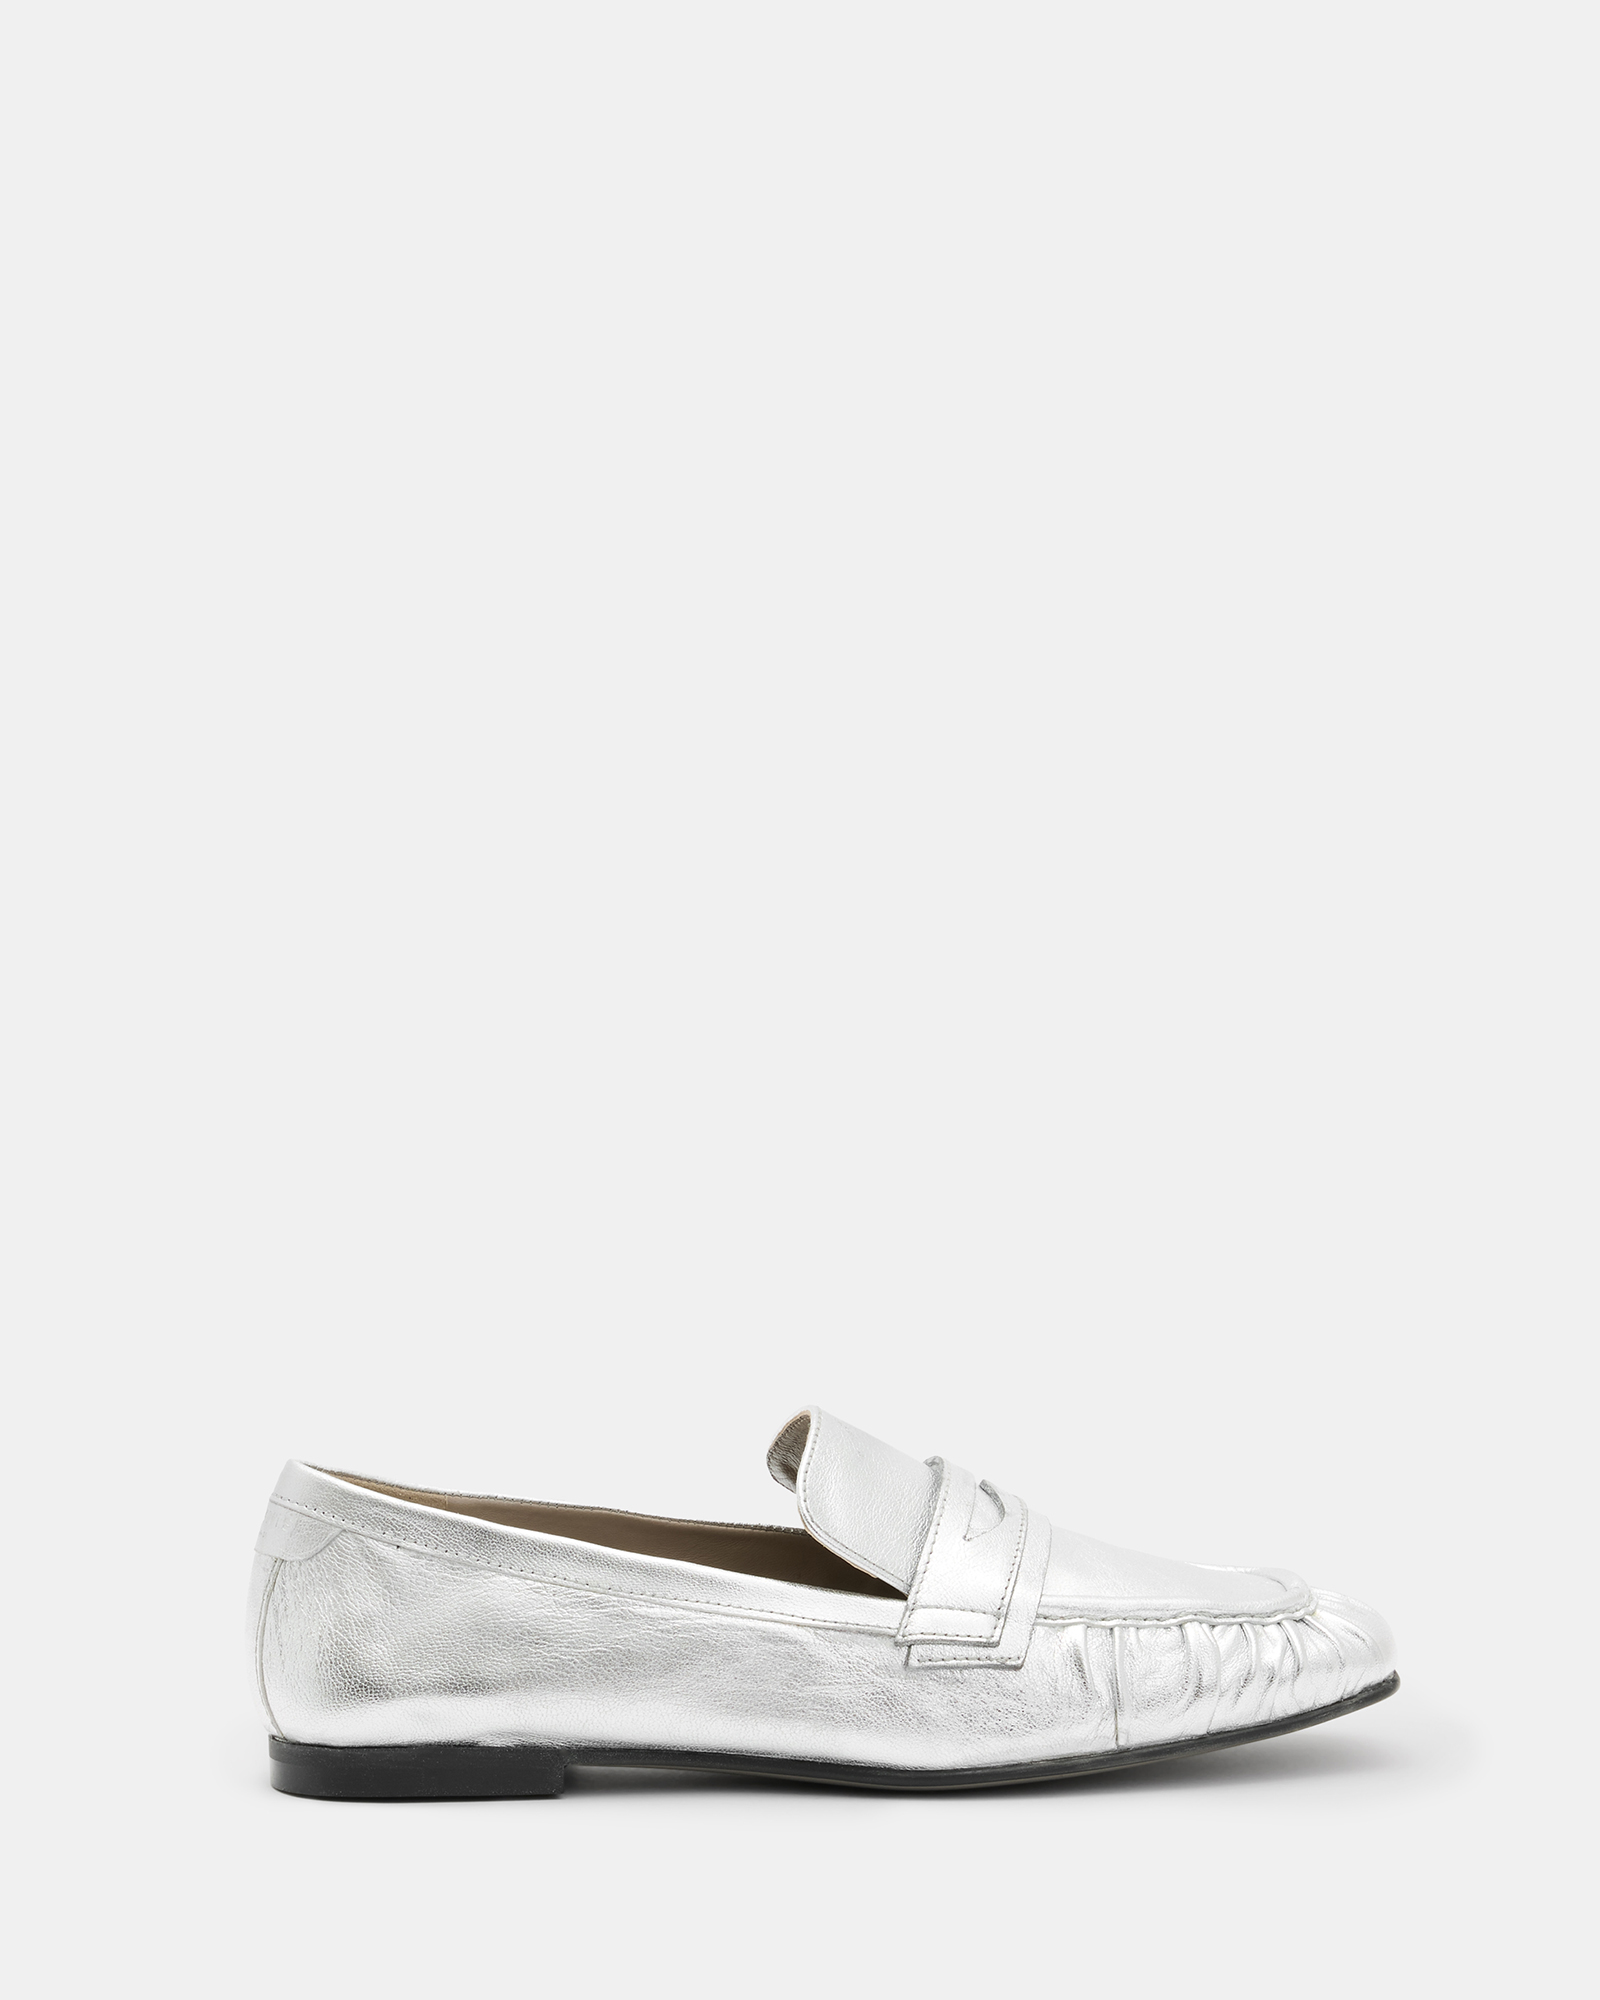 AllSaints Sapphire Metallic Leather Loafer Shoes